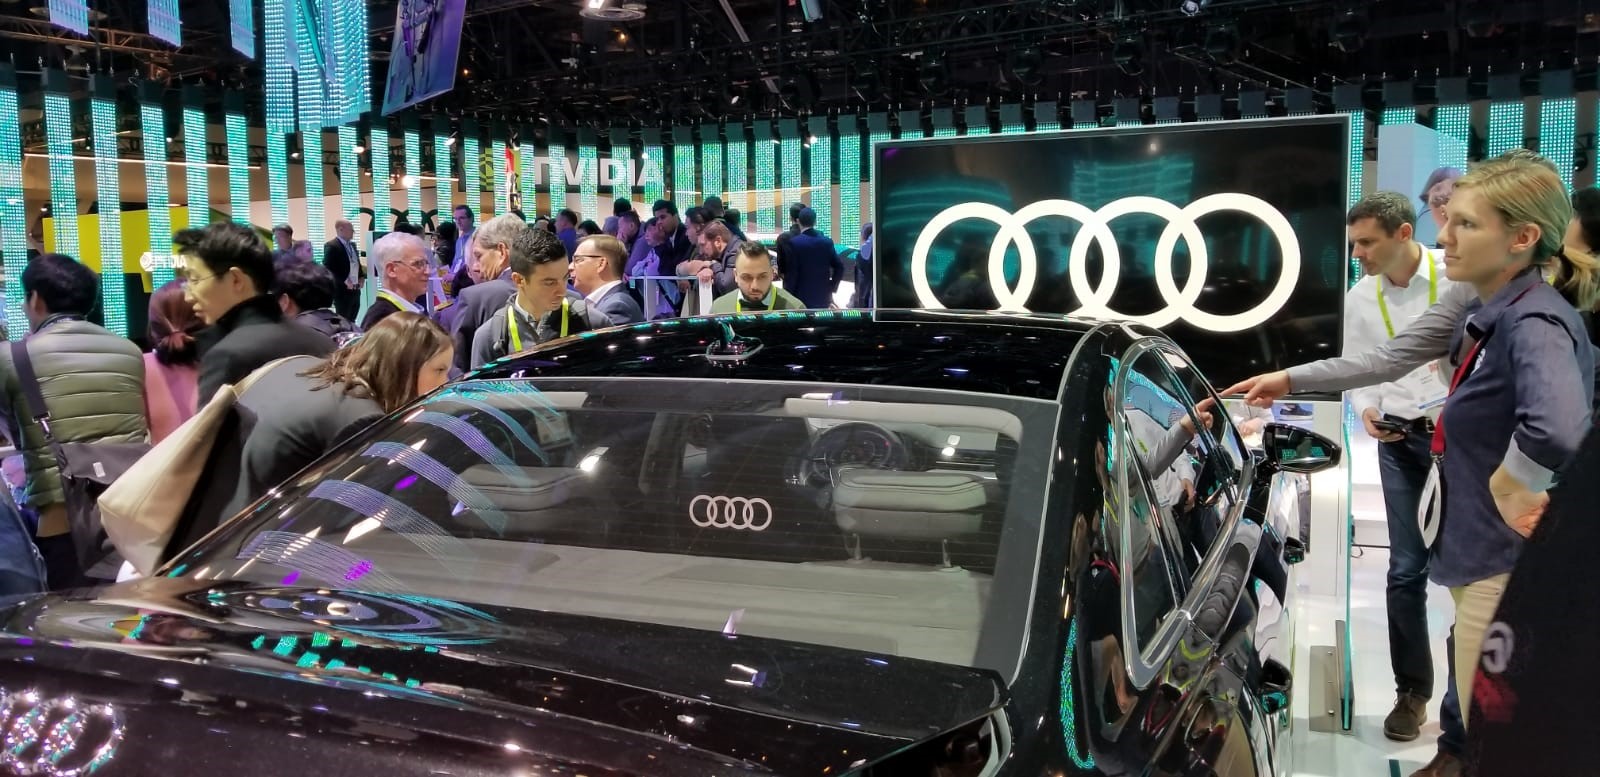 Audi’s presentation at CES 2019 focused heavily on its revamped infotainment system. 